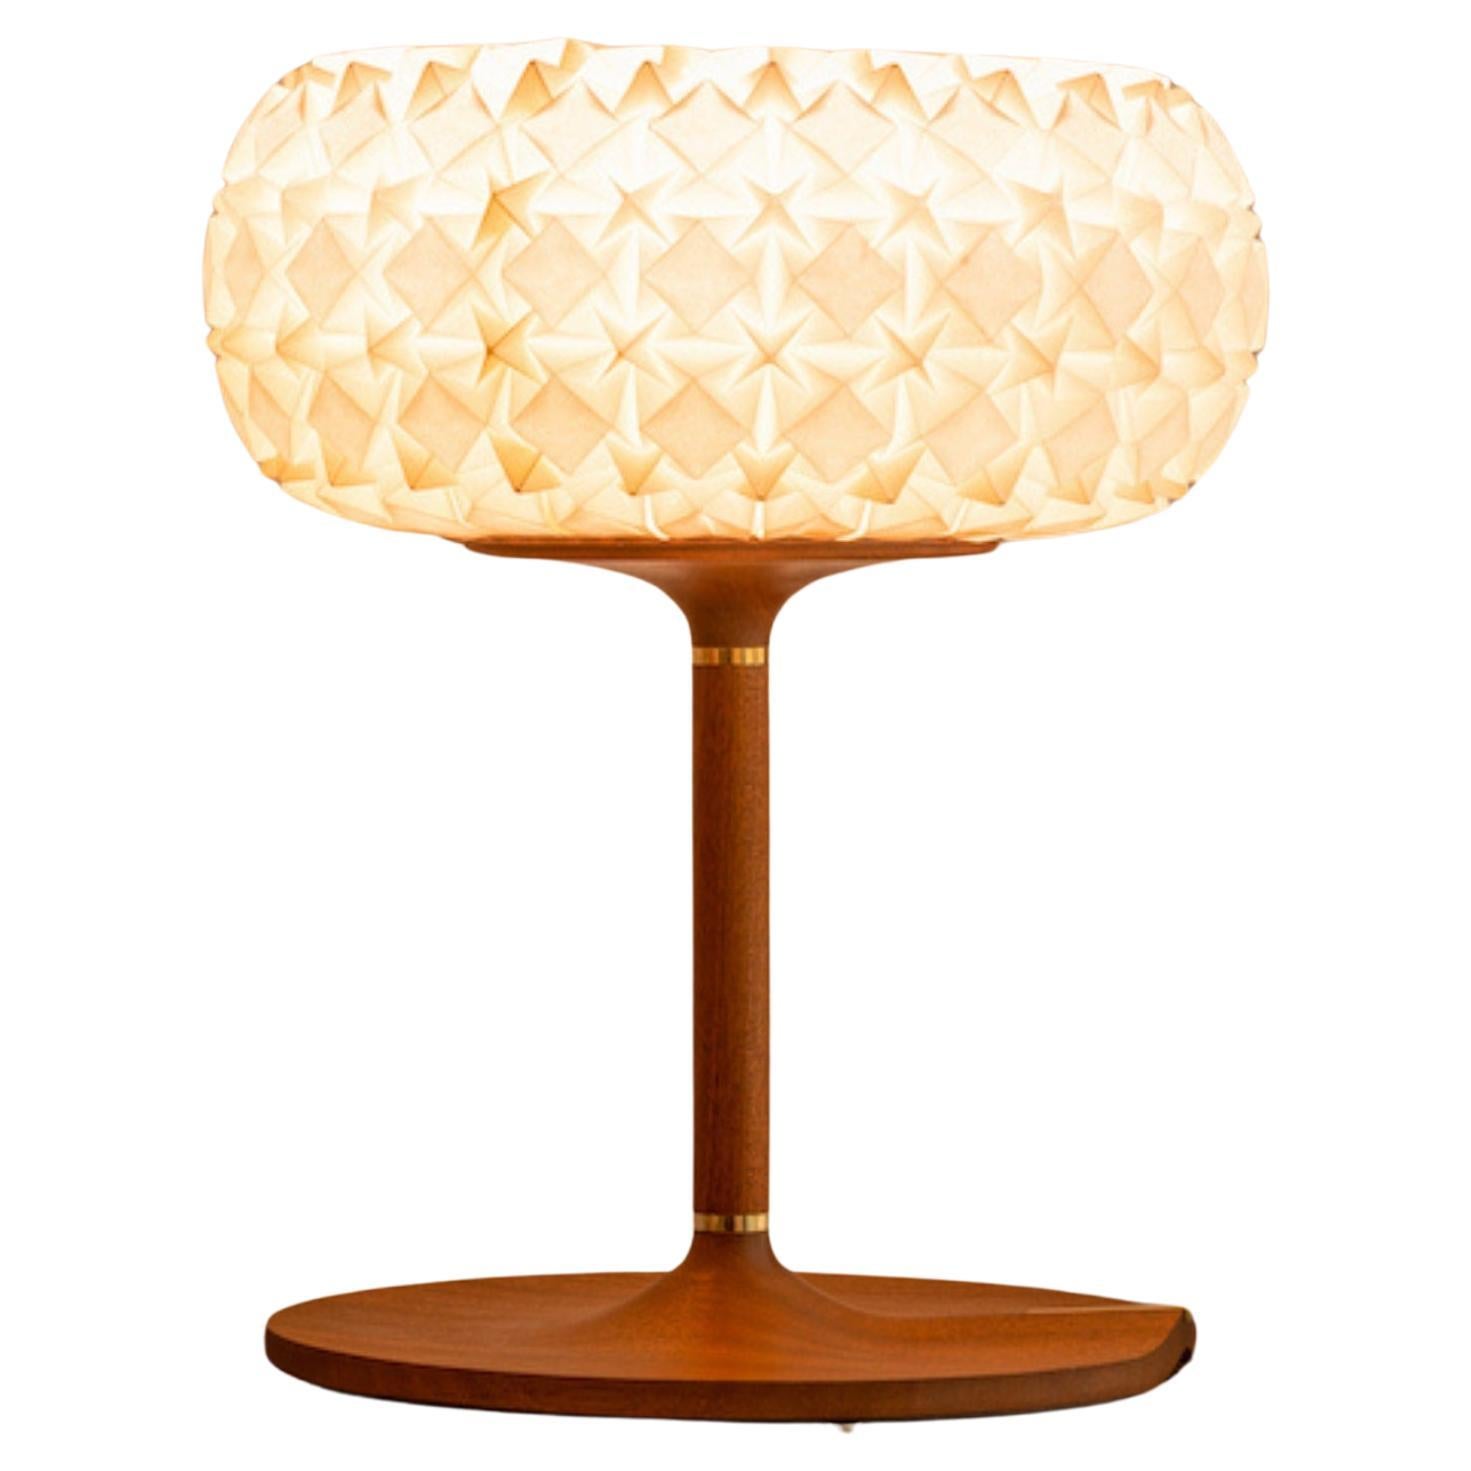 Origami Paper and Mahogany "96 Molecules" Tall Table Lamp by Aqua Creations For Sale